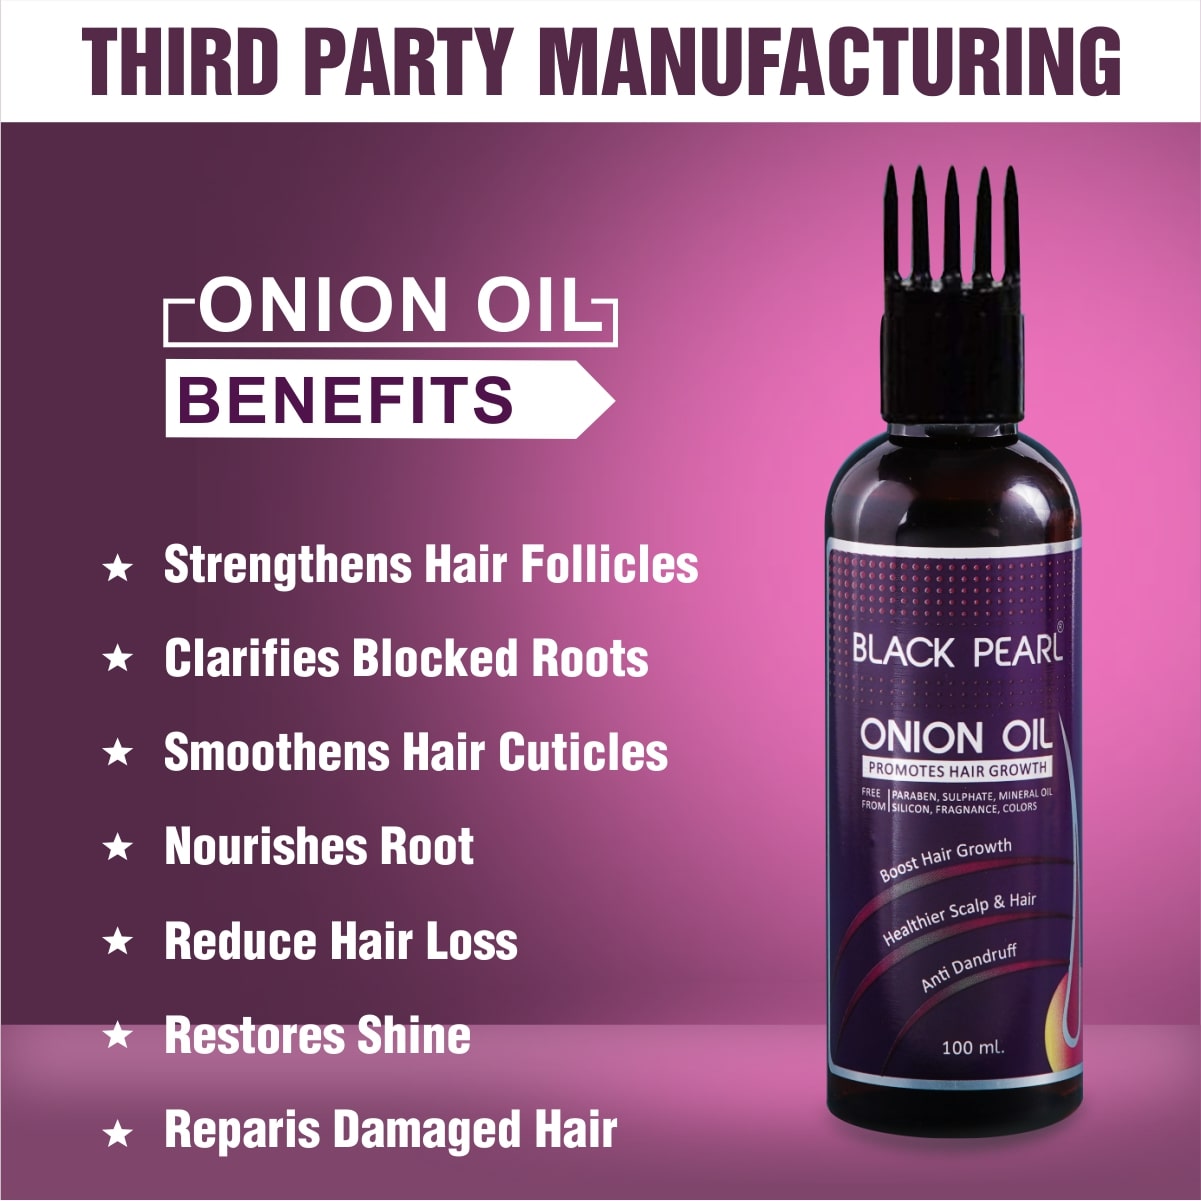 Onion Oil Third Party Manufacturing